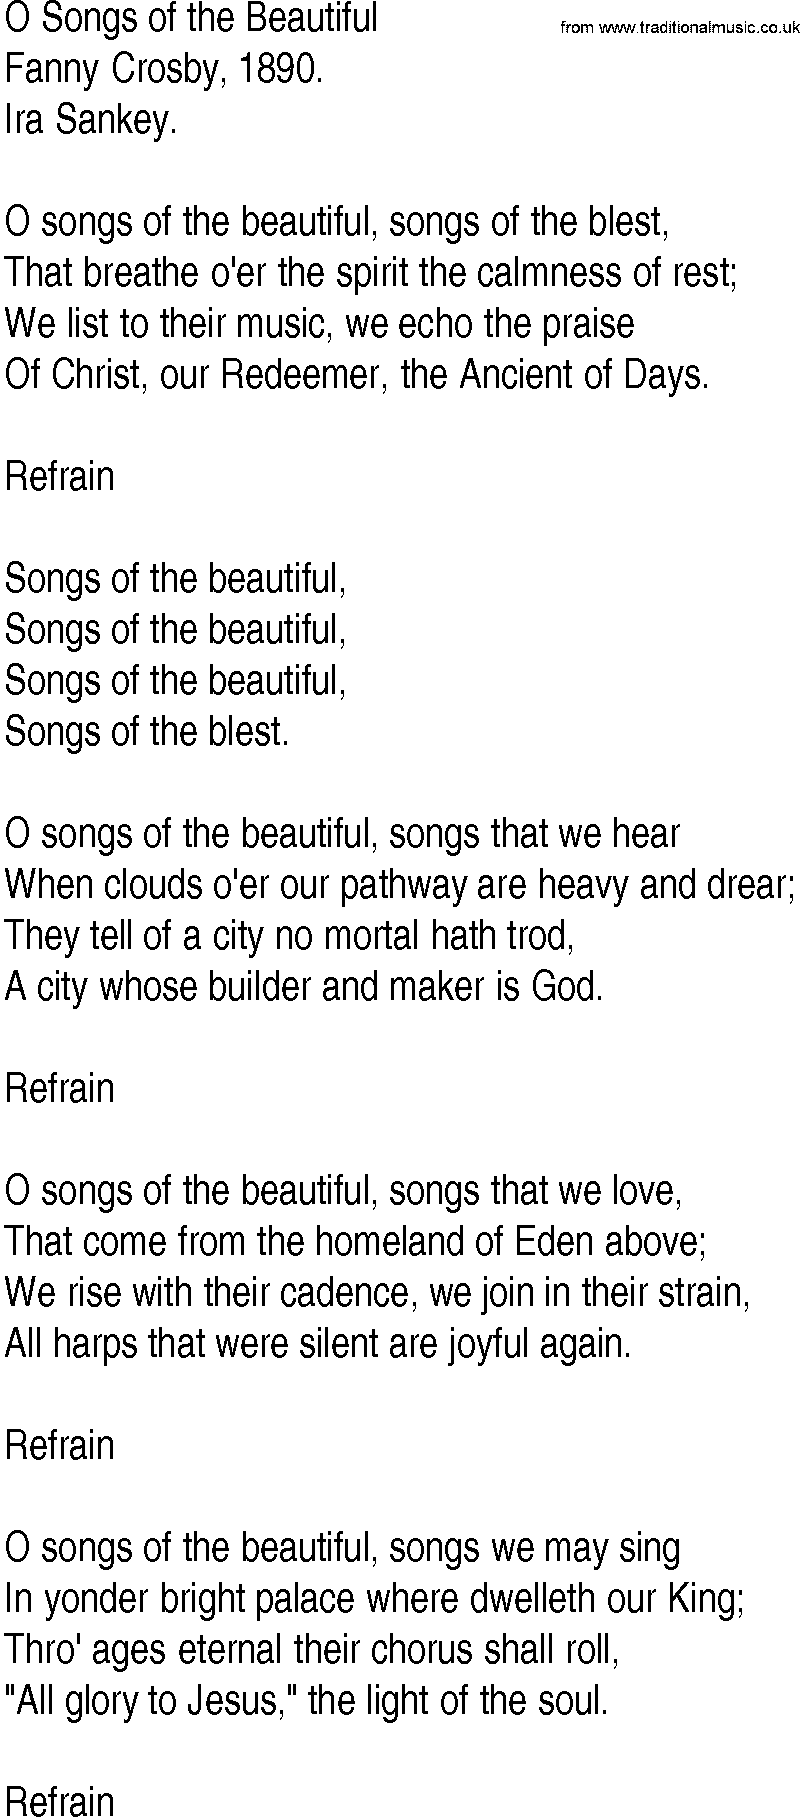 Hymn and Gospel Song: O Songs of the Beautiful by Fanny Crosby lyrics